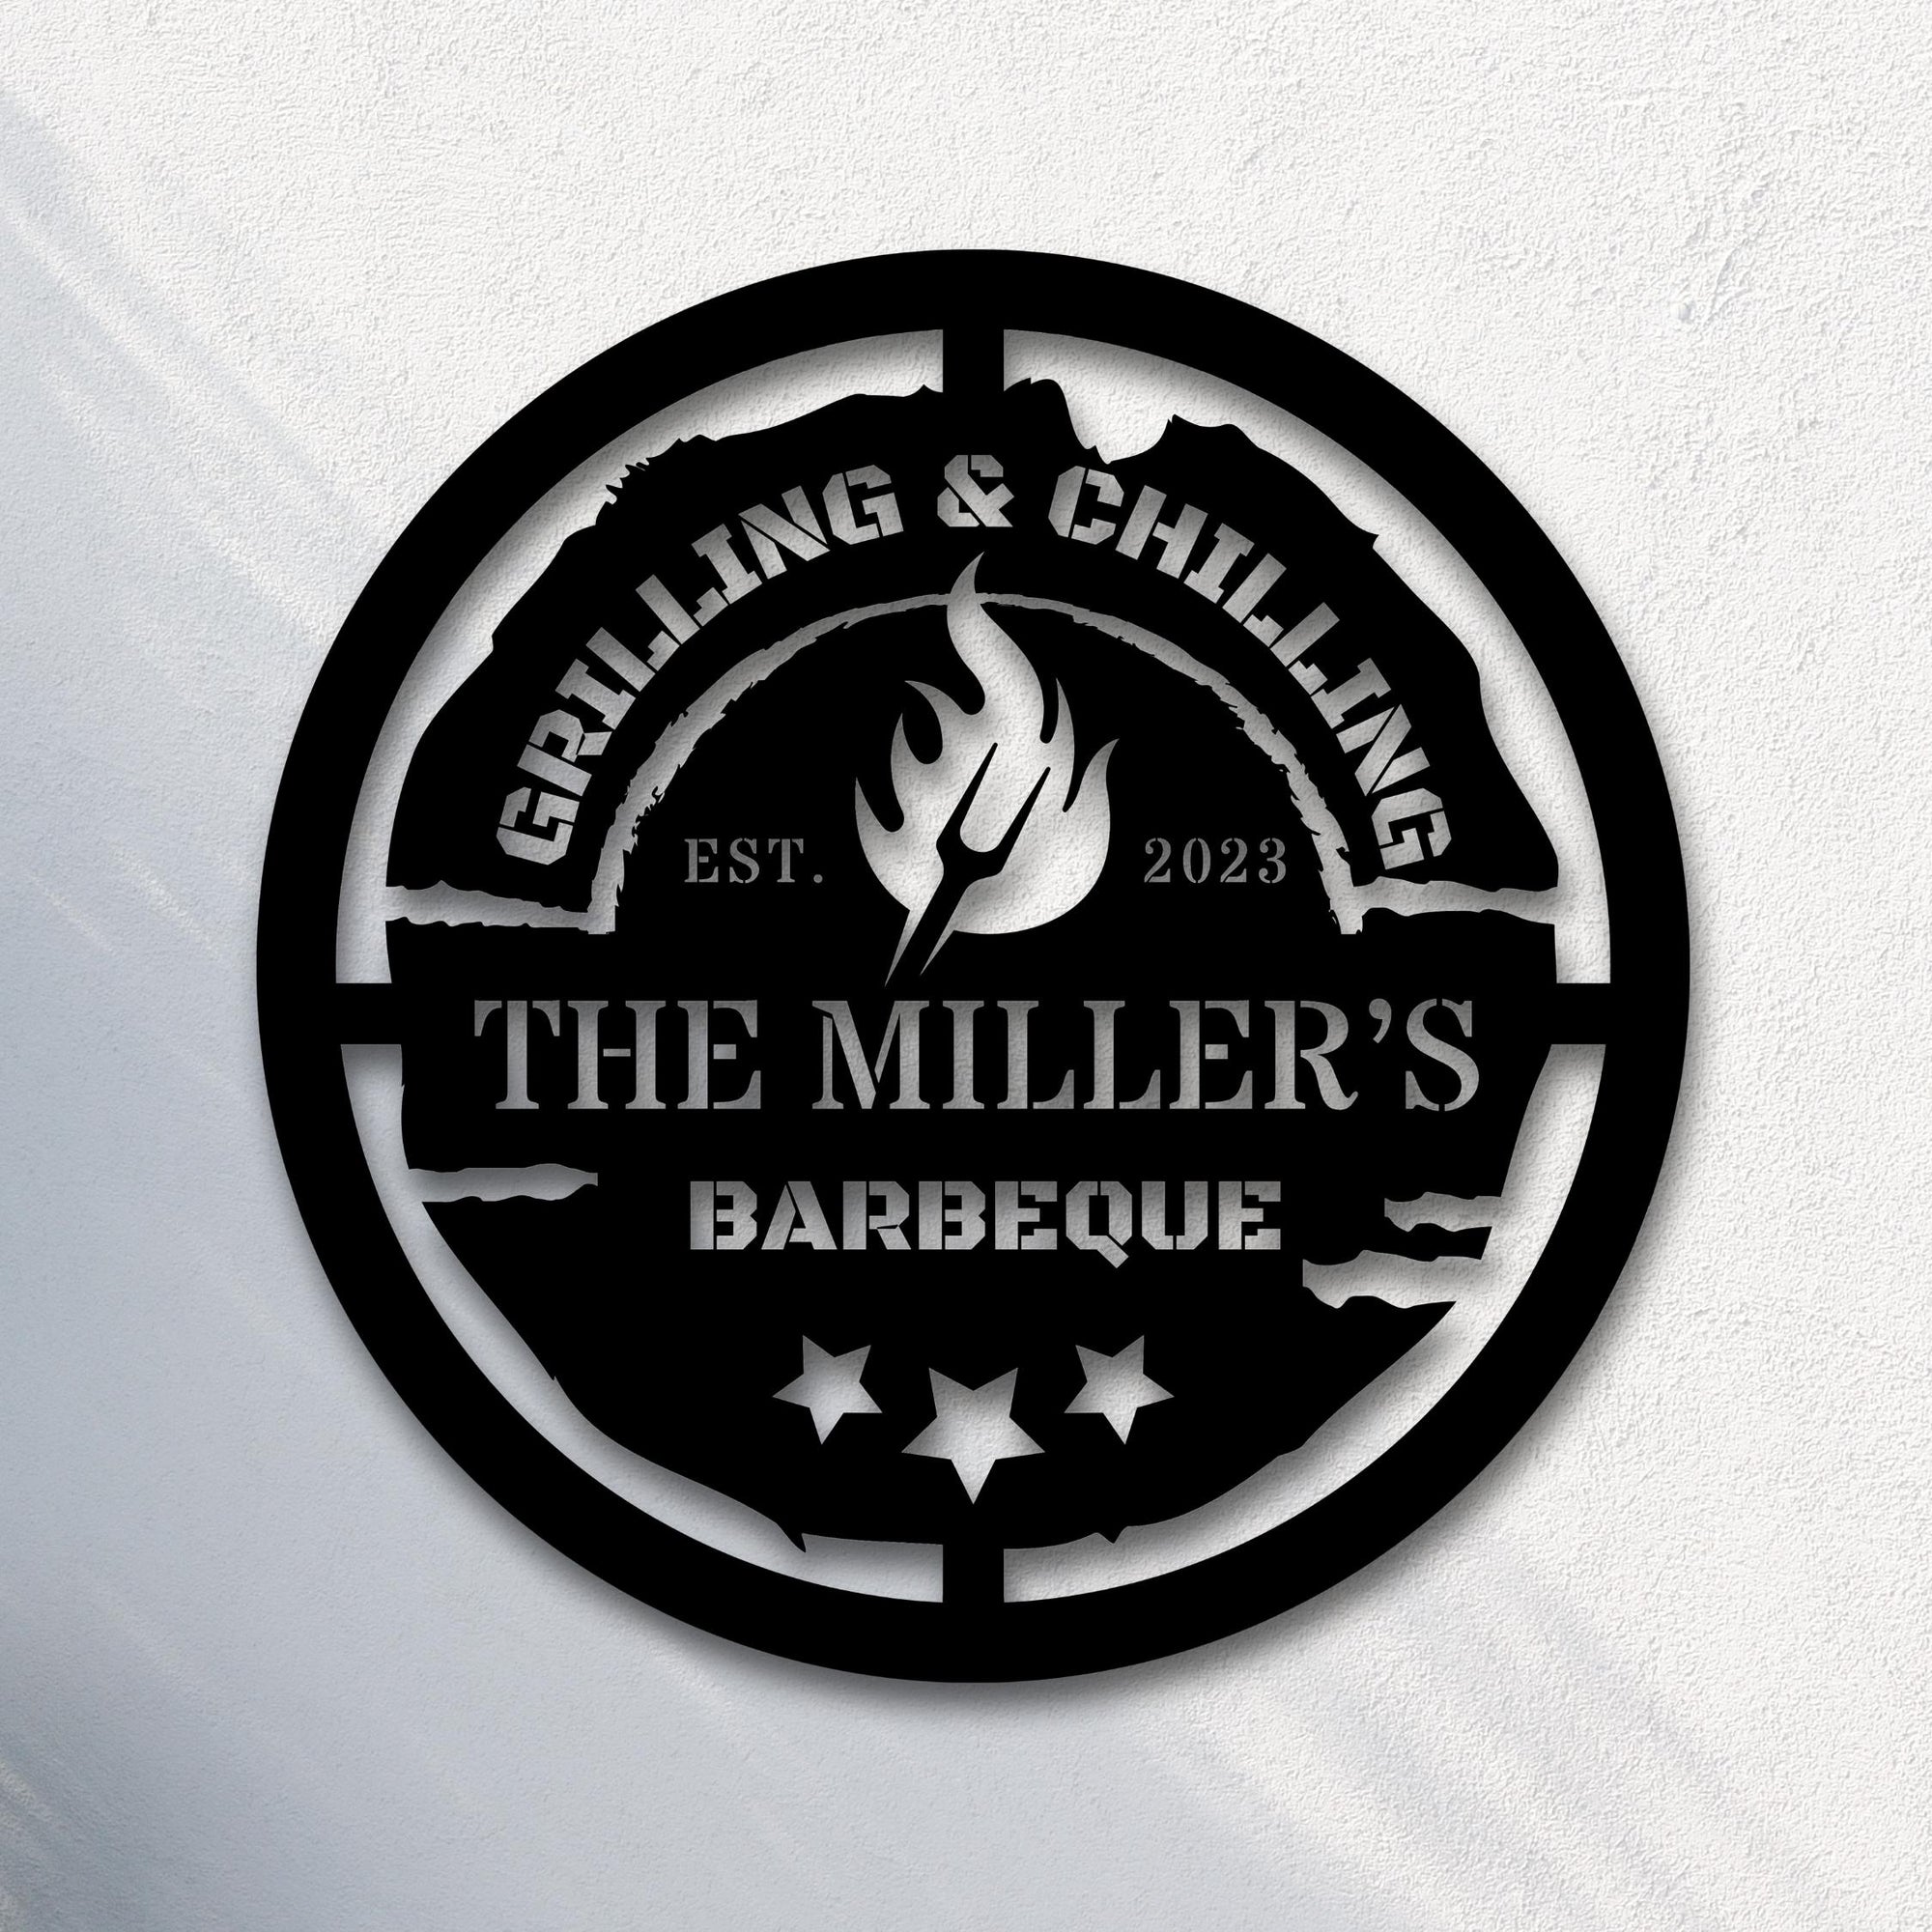 Customised Barbecue Hoop, Personalised Family BBQ Wall Art, Chill &amp; Grill Display Hanging Sign, Kitchen Backyard, Housewarming Decor Signage